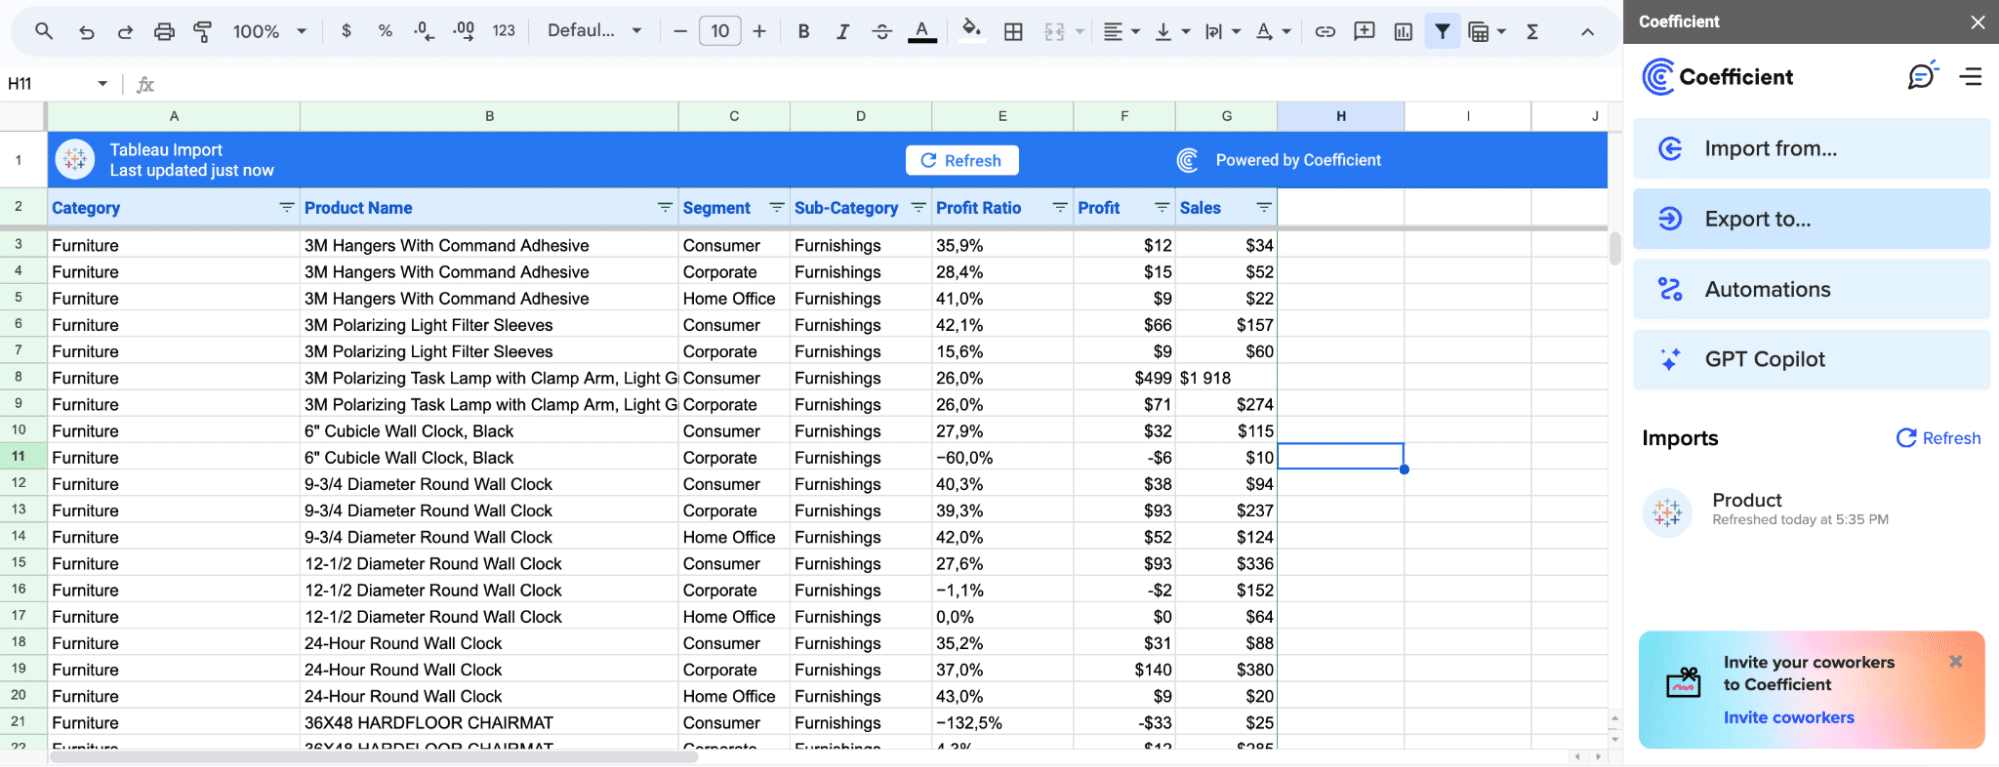 Coefficient importing real-time data to Google Sheets for Tableau visualization preparation